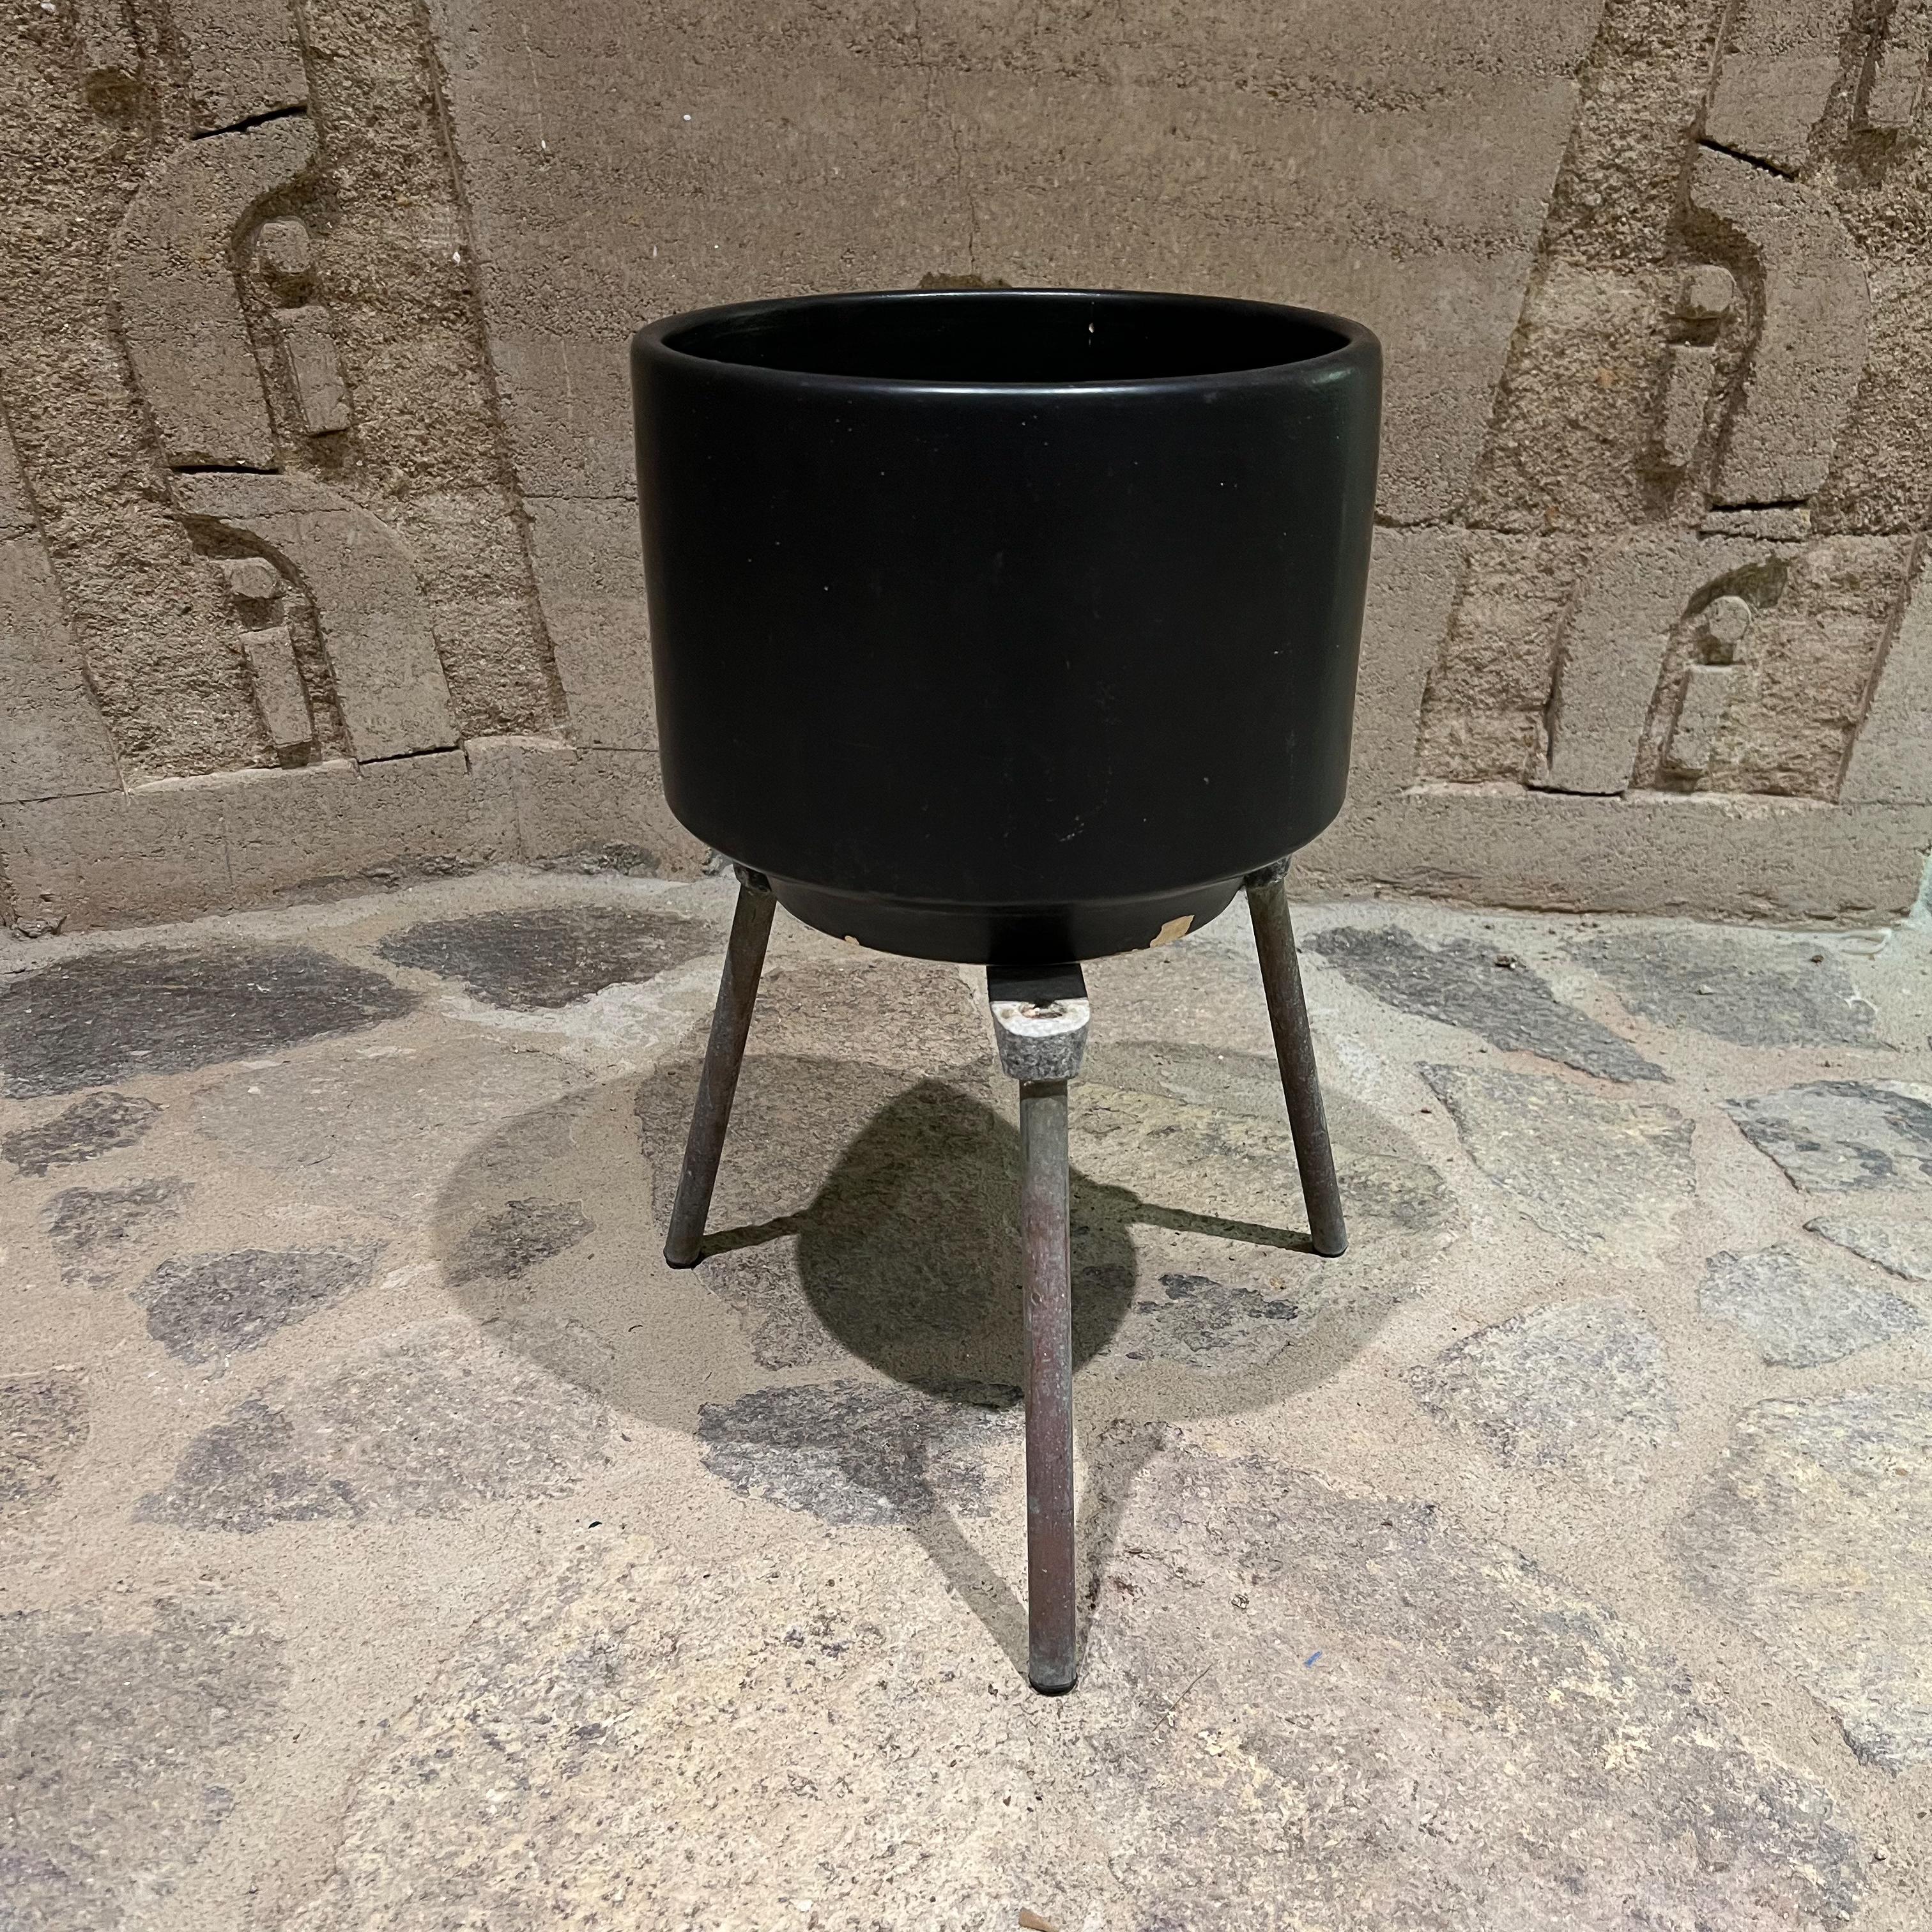 1950s Midcentury Modern Tripod Planter Pedestal Stand in Patinated Aluminum For Sale 1